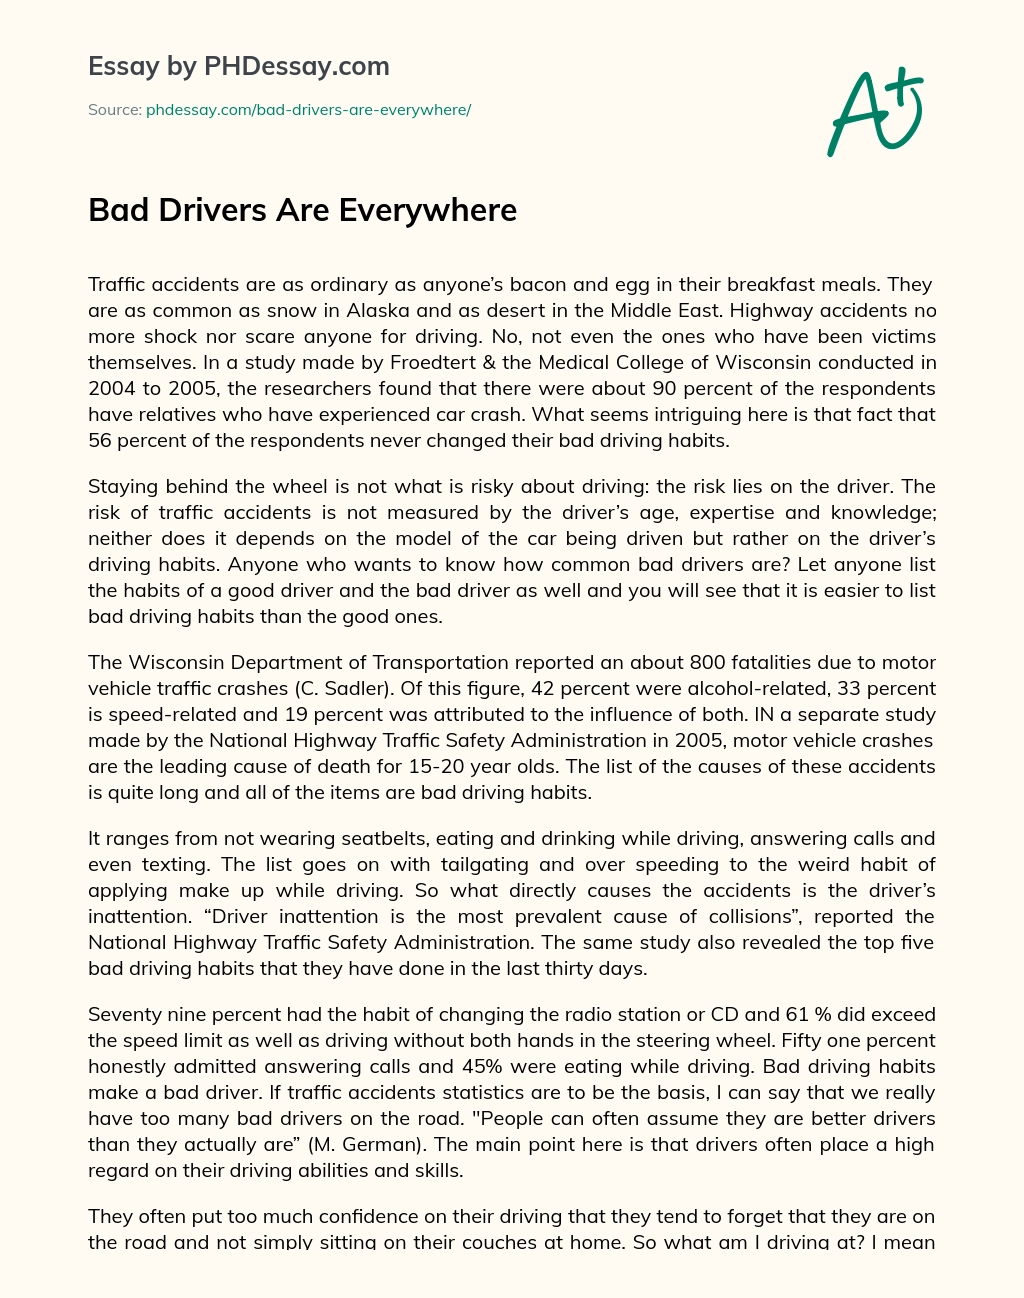 Bad Drivers Are Everywhere essay